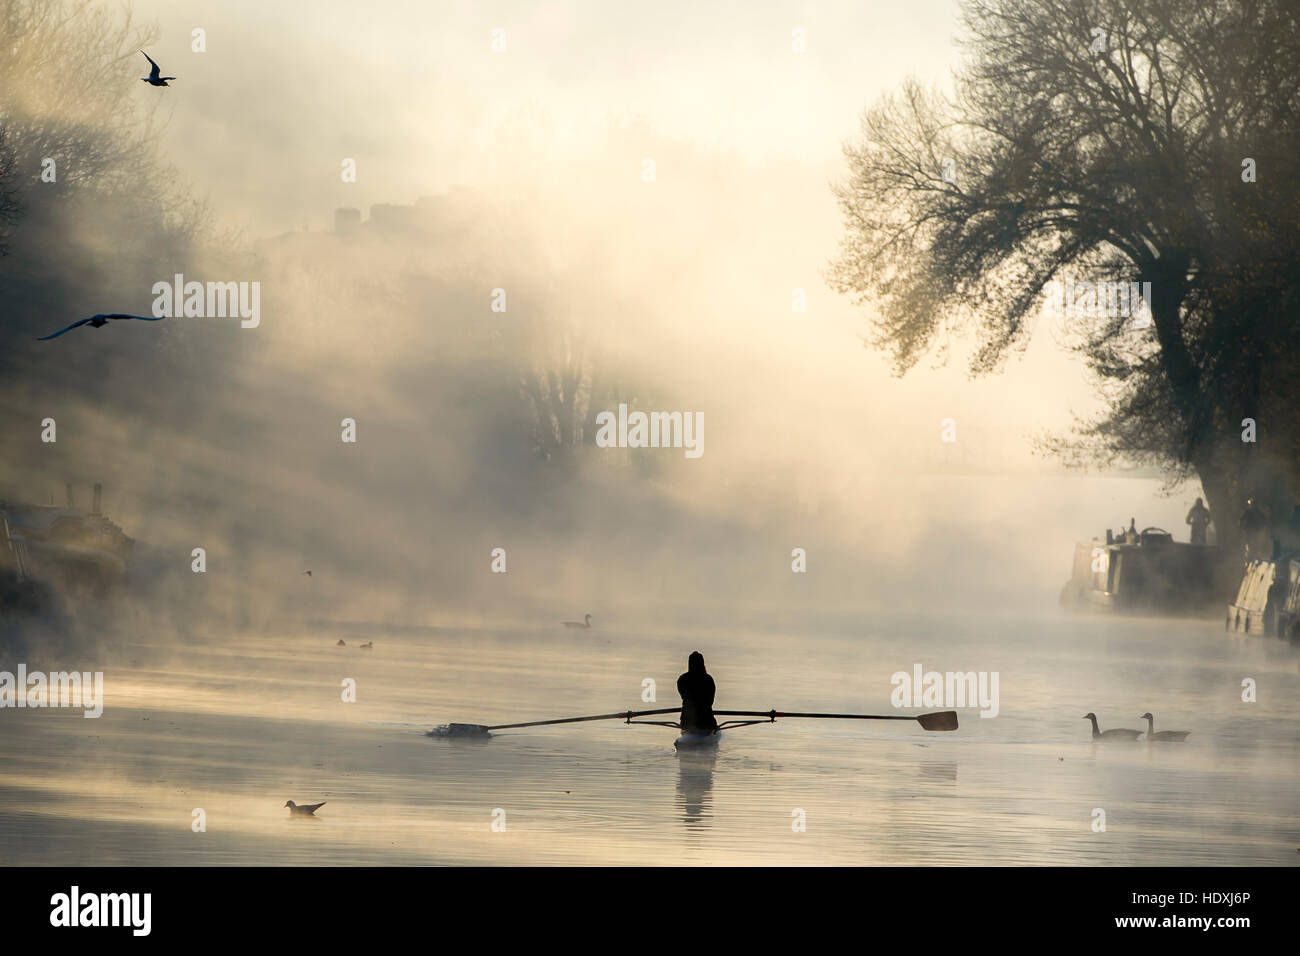 30th November, 2016. London, UK.  A woman rows along the River Lea in Tottenham, London, on a cold misty morning. Photo: David Mirzoeff/ Alamy Stock Photo